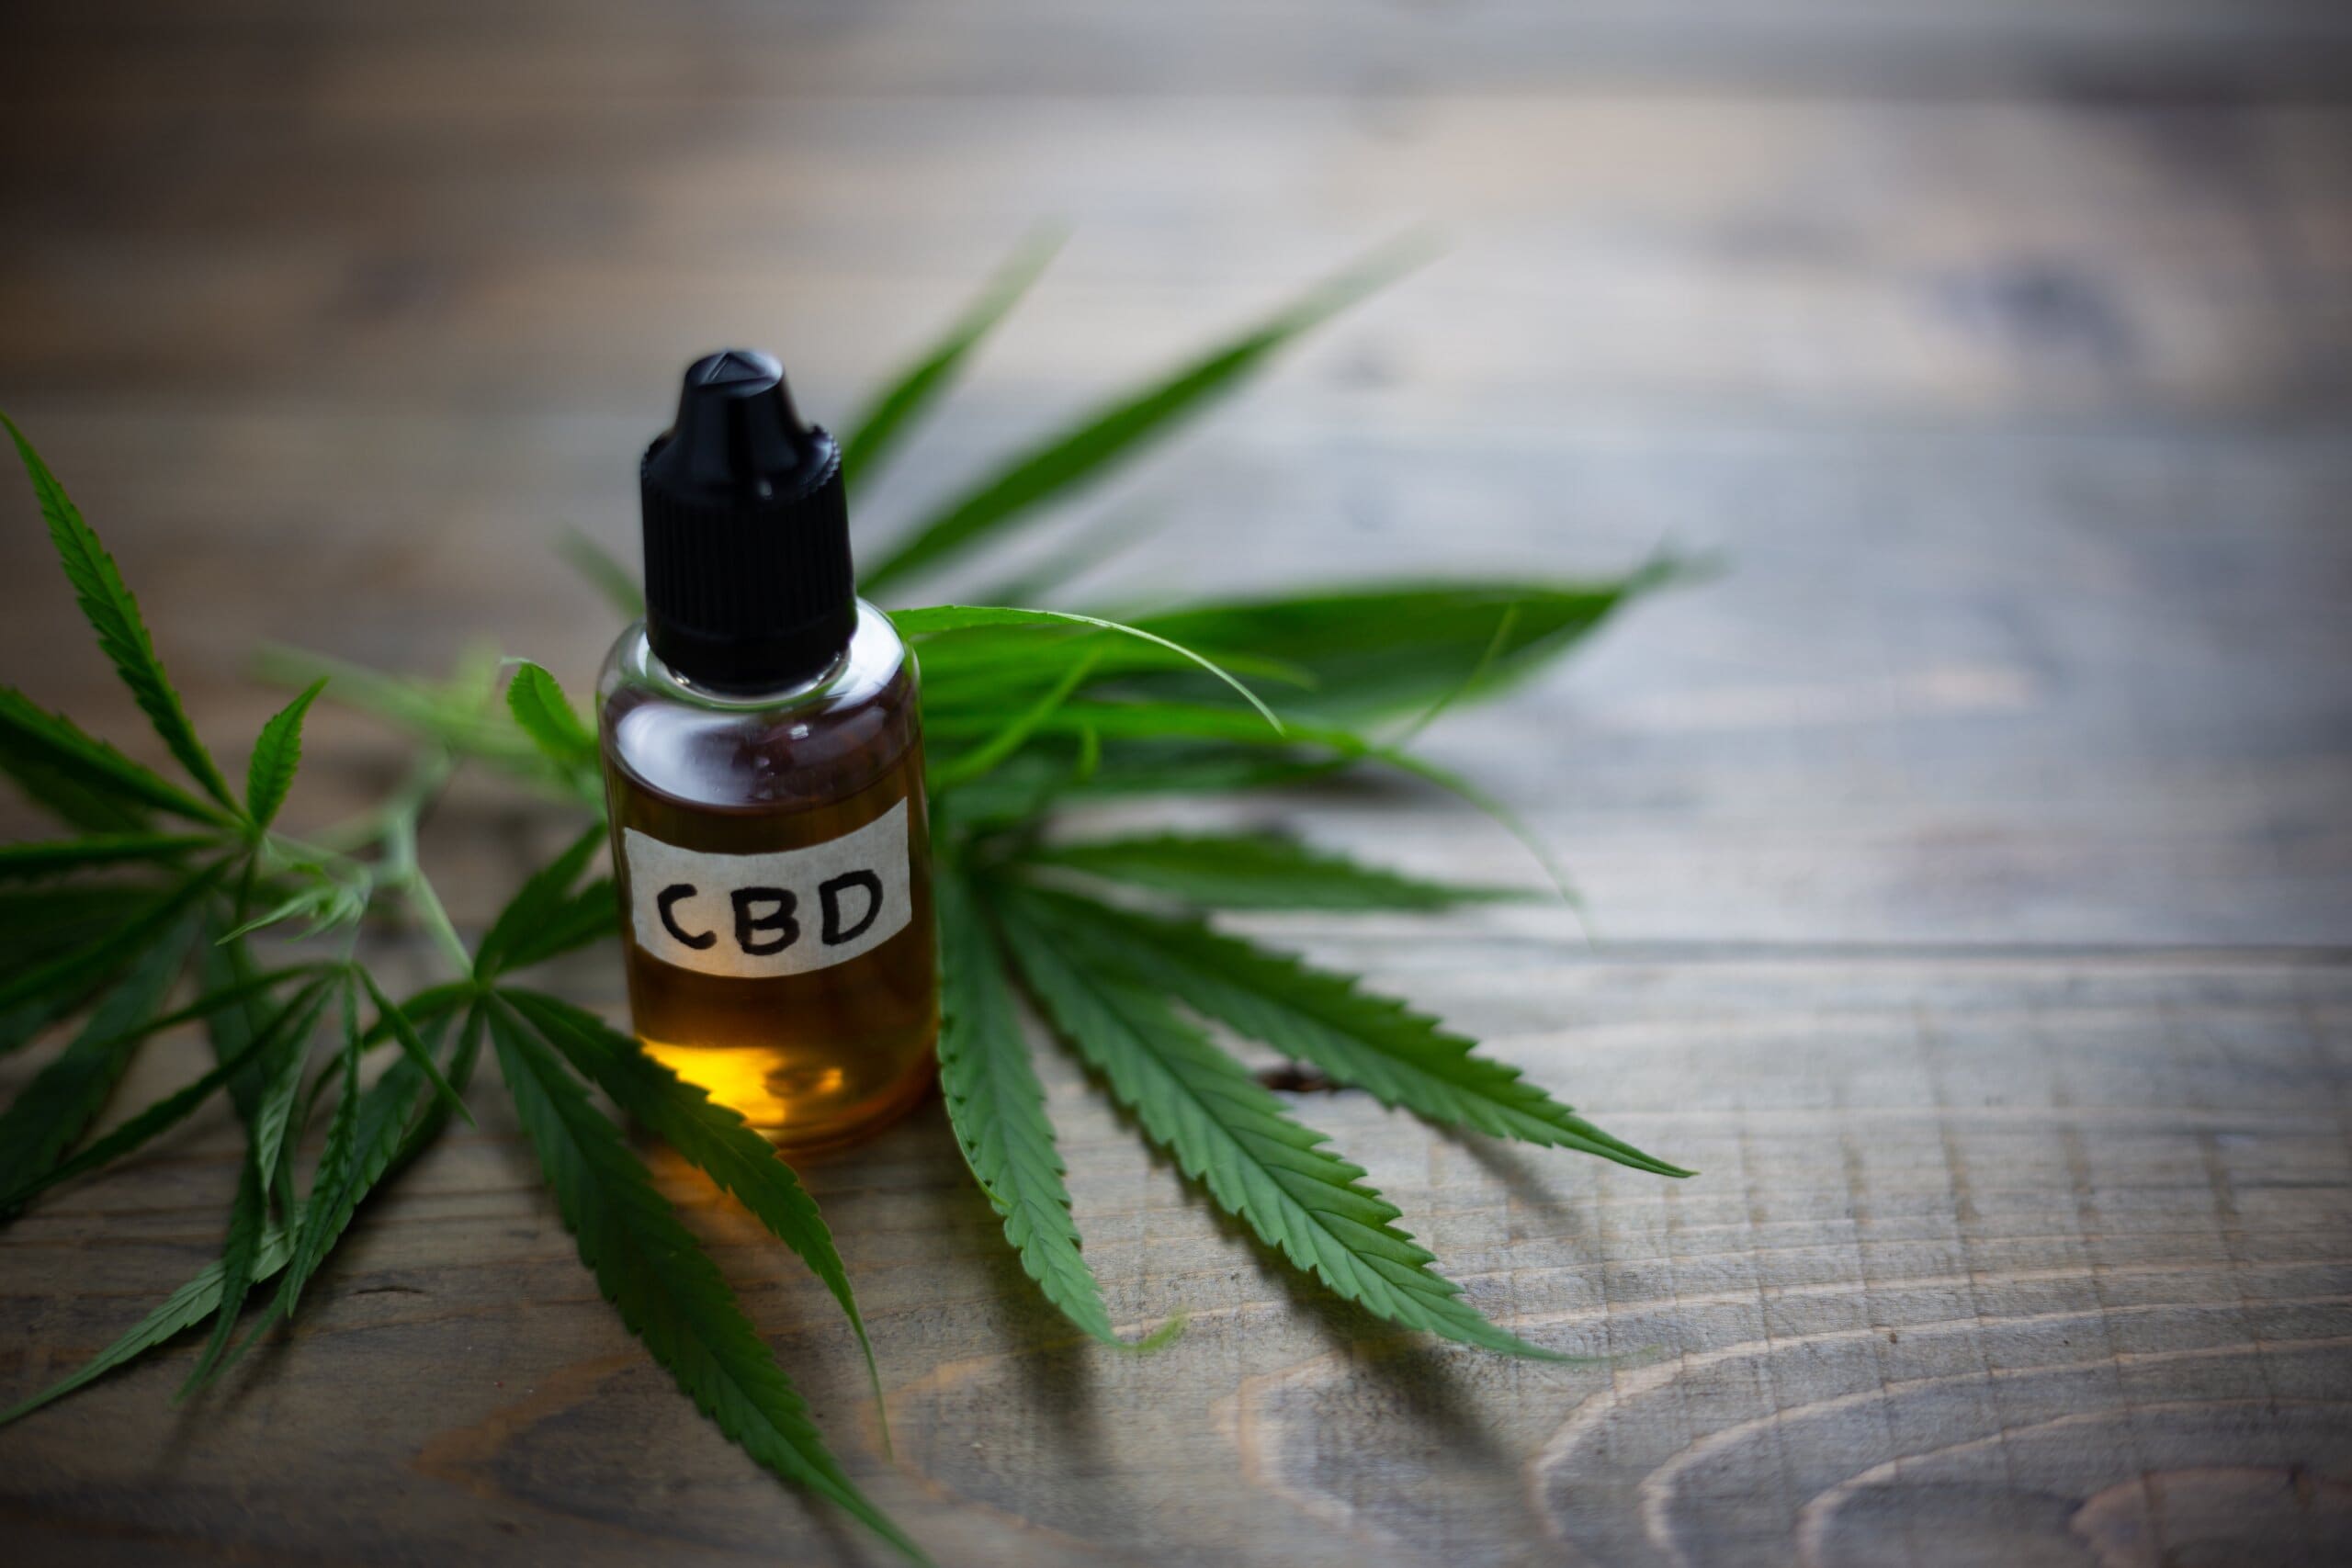 Image of cannabis leaves next to a small glass bottle labelled 'CBD'.